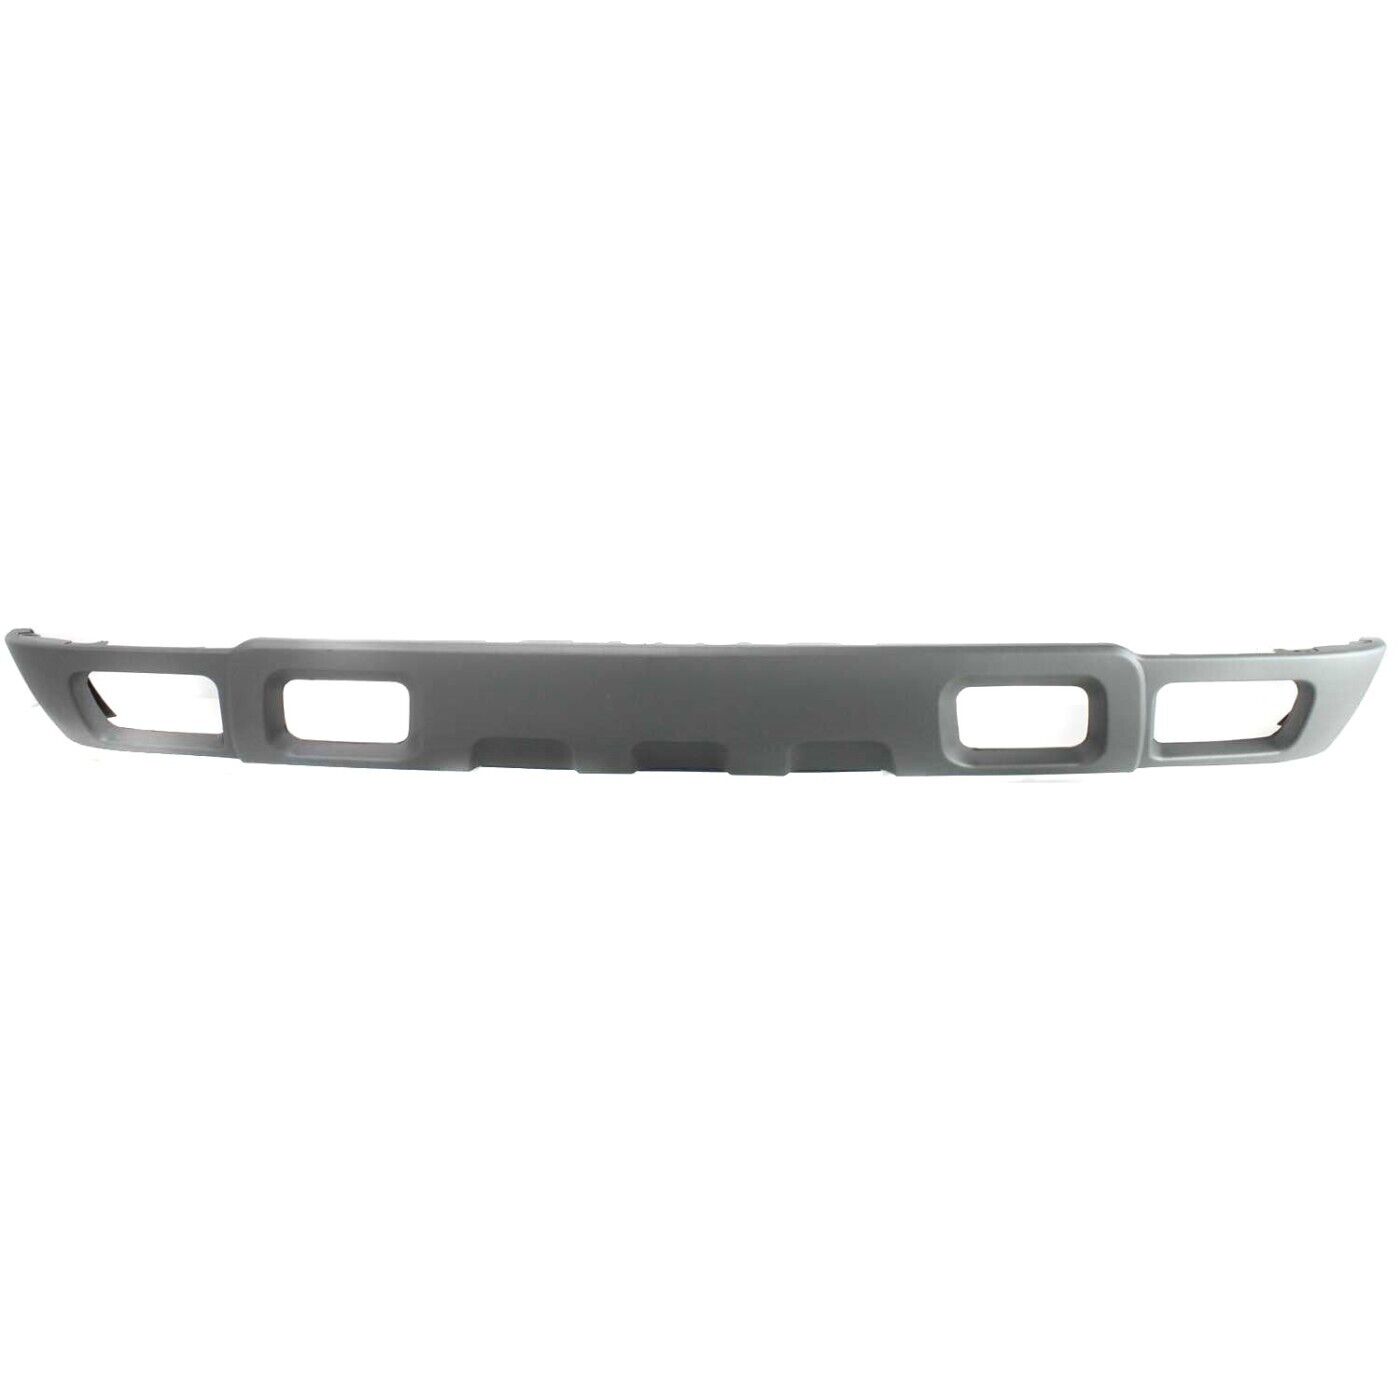 Valance For 2003-2006 Chevrolet Silverado 1500 Front Models With Towing Package